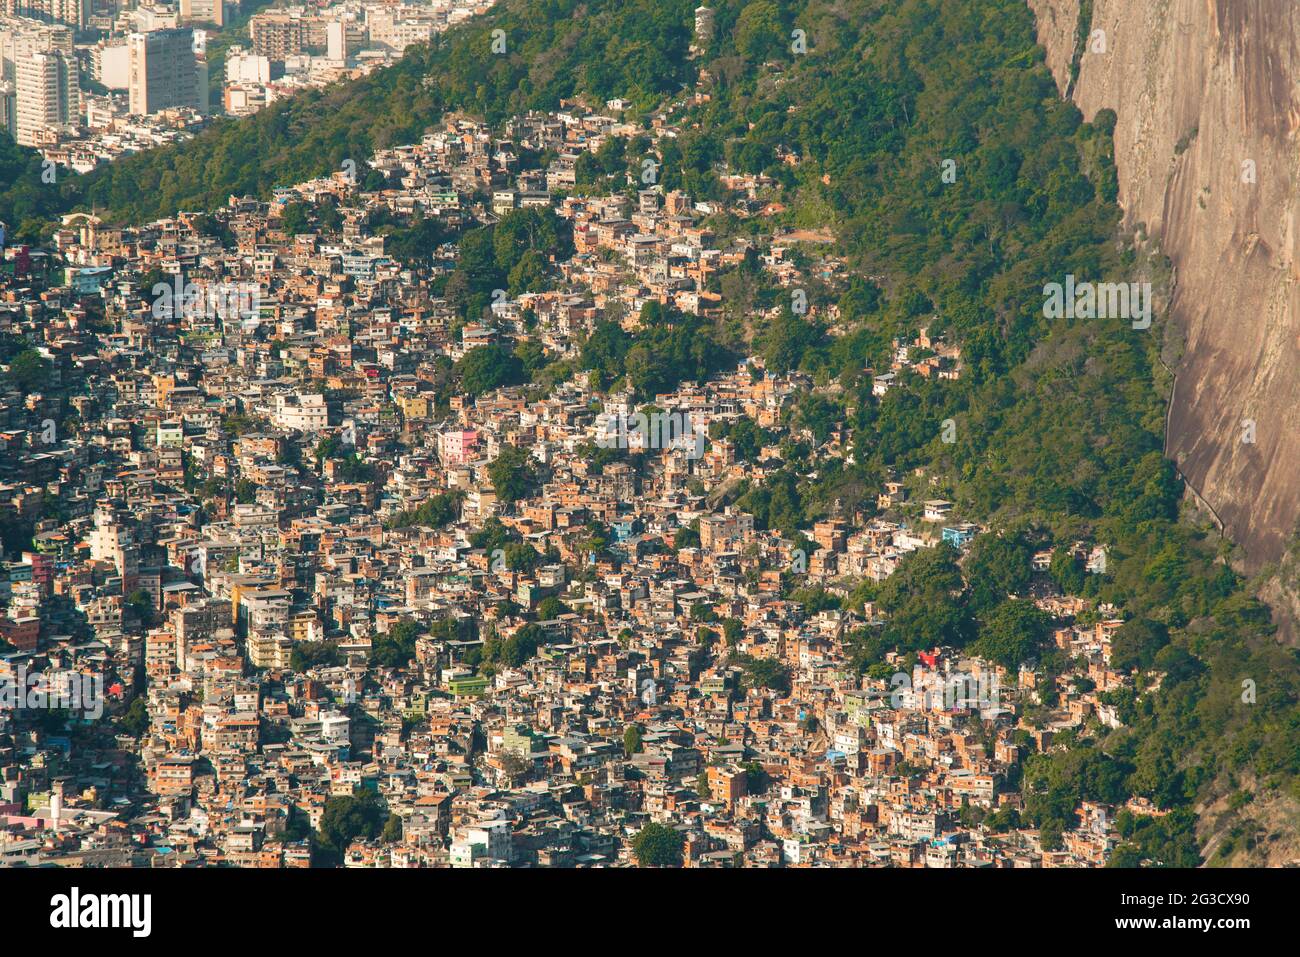 Aerial View of Favela Rocinha in Rio de Janeiro, Which Has 100,000 Inhabintants and is the Largest in Brazil Stock Photo